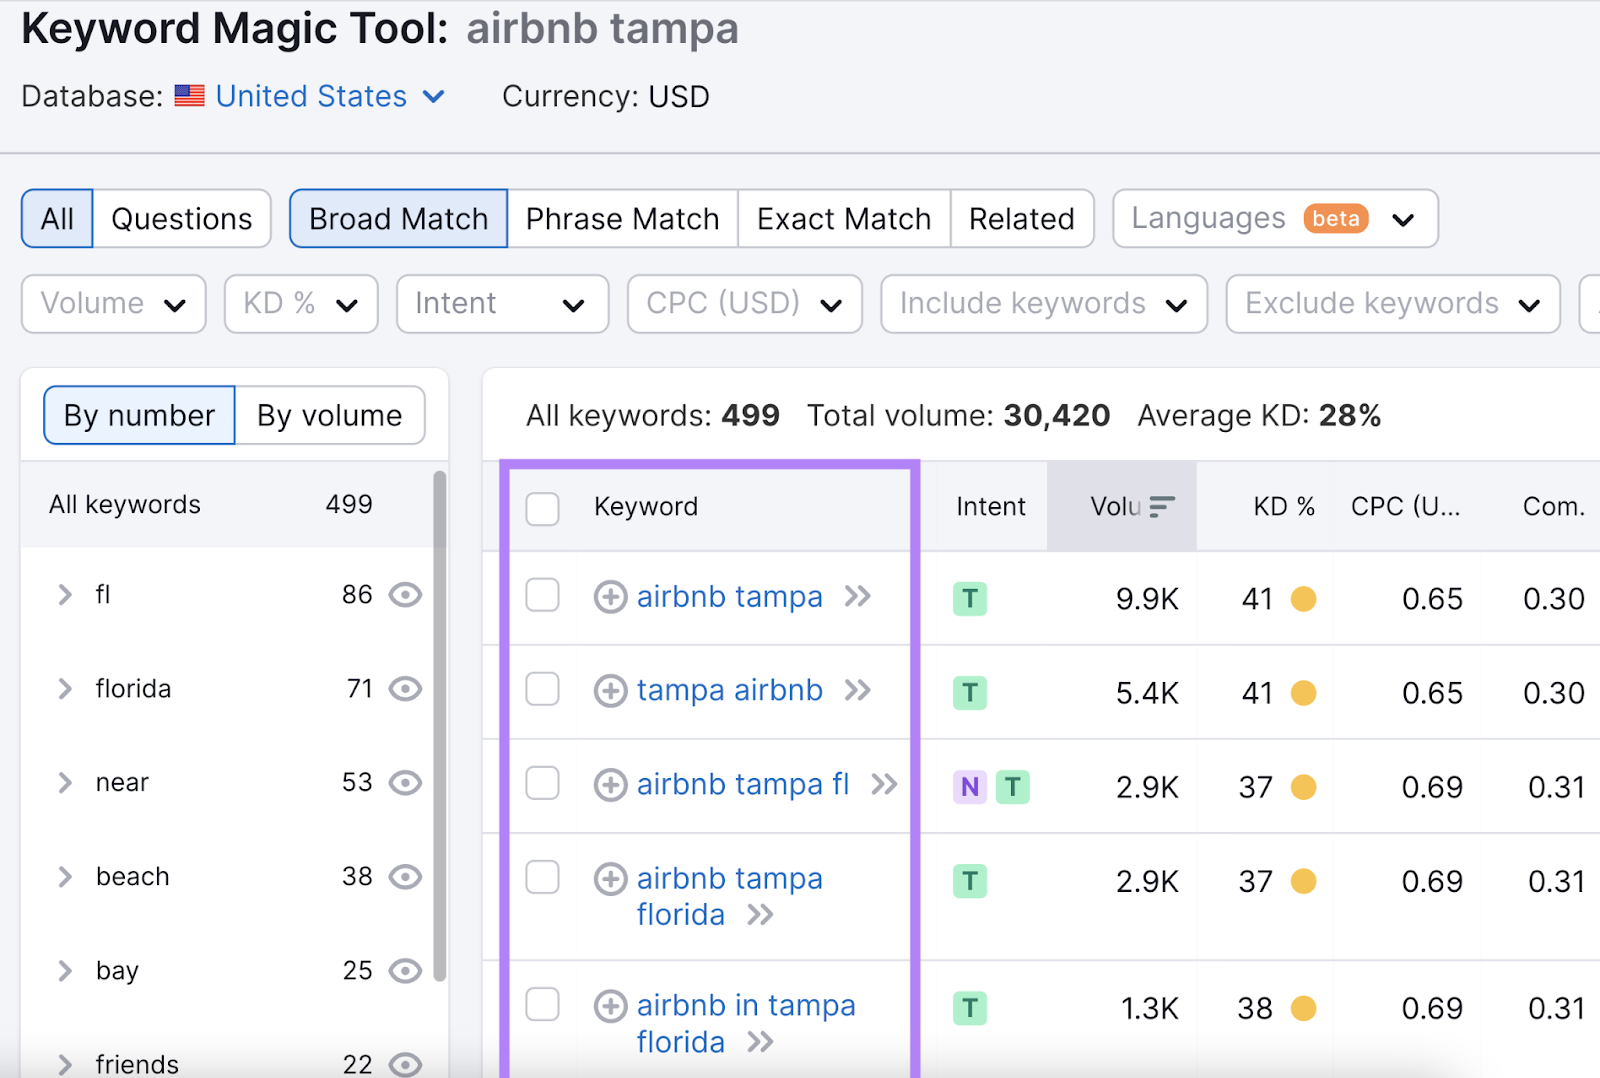 list of related keywords for “airbnb tampa”